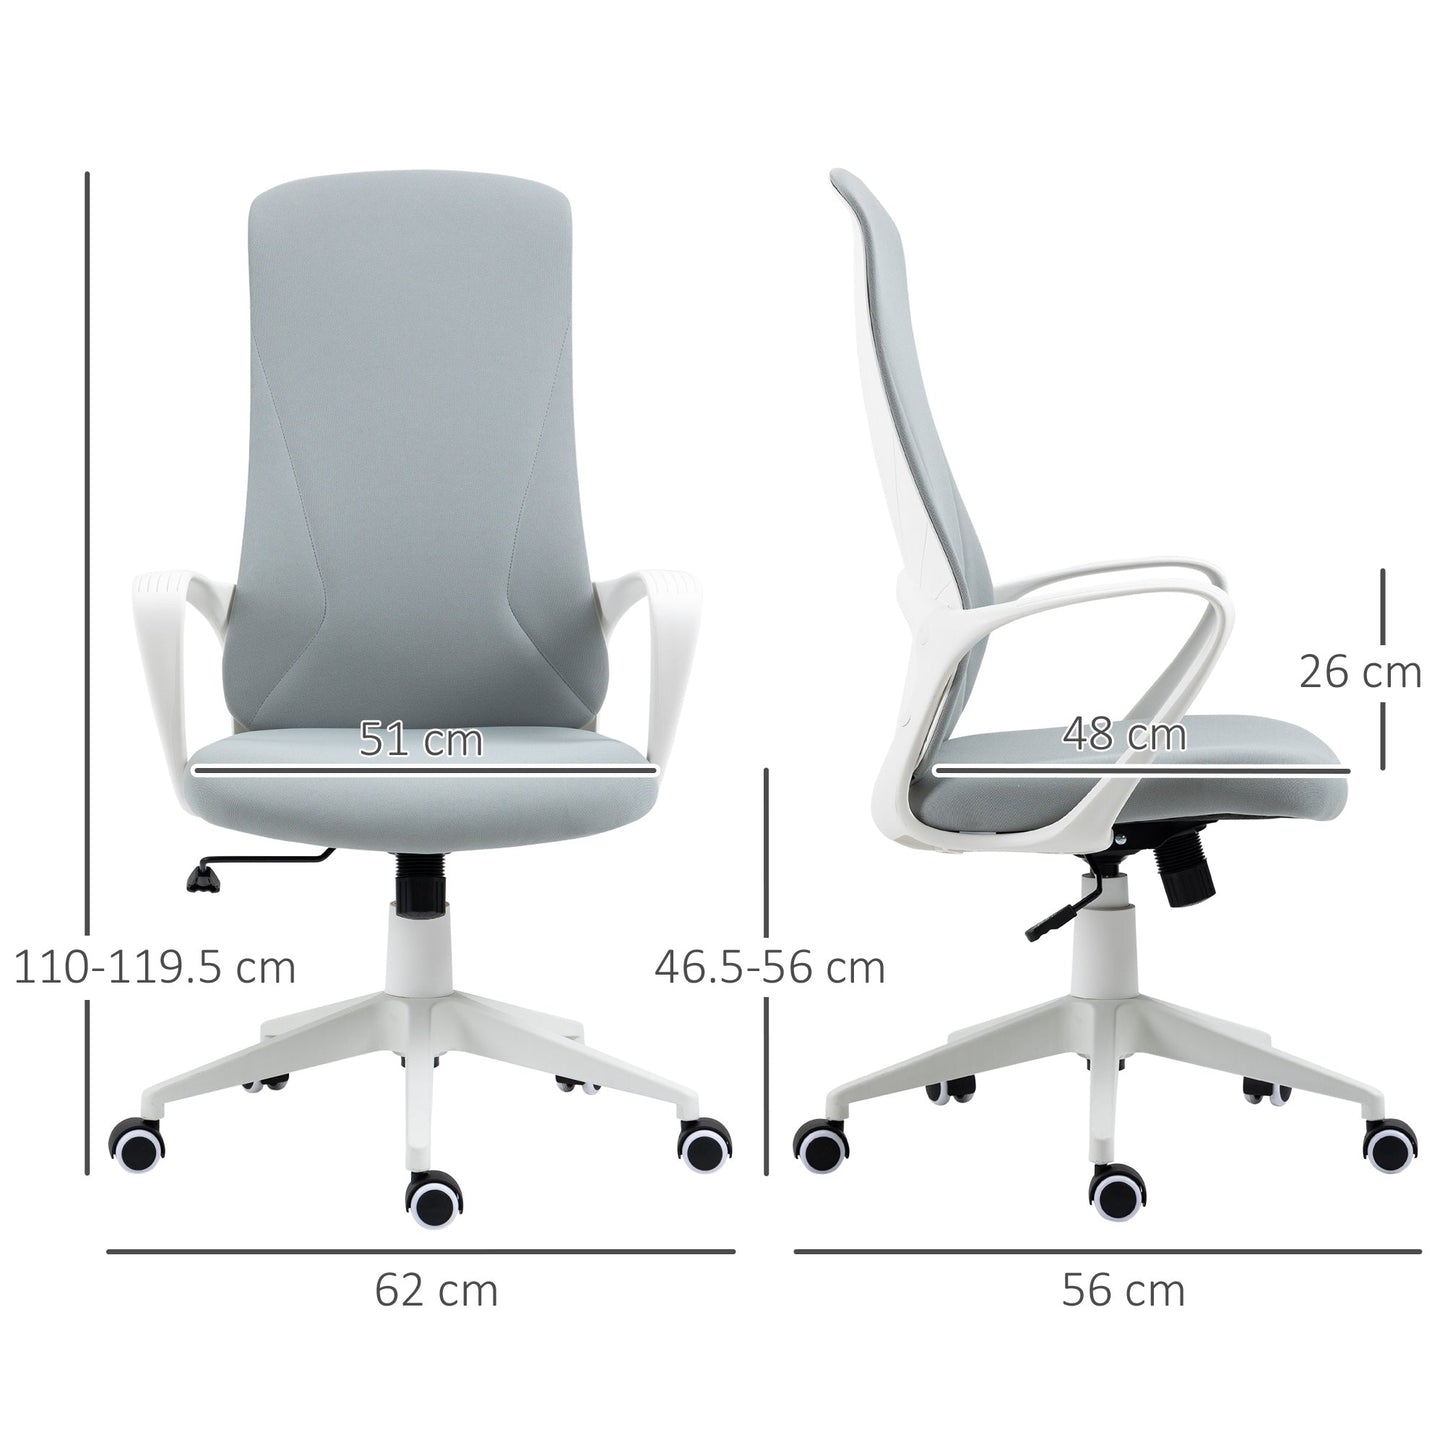 Ergonomic office chair winner with adjustable height and tilt function, 62x56x110-119.5 cm